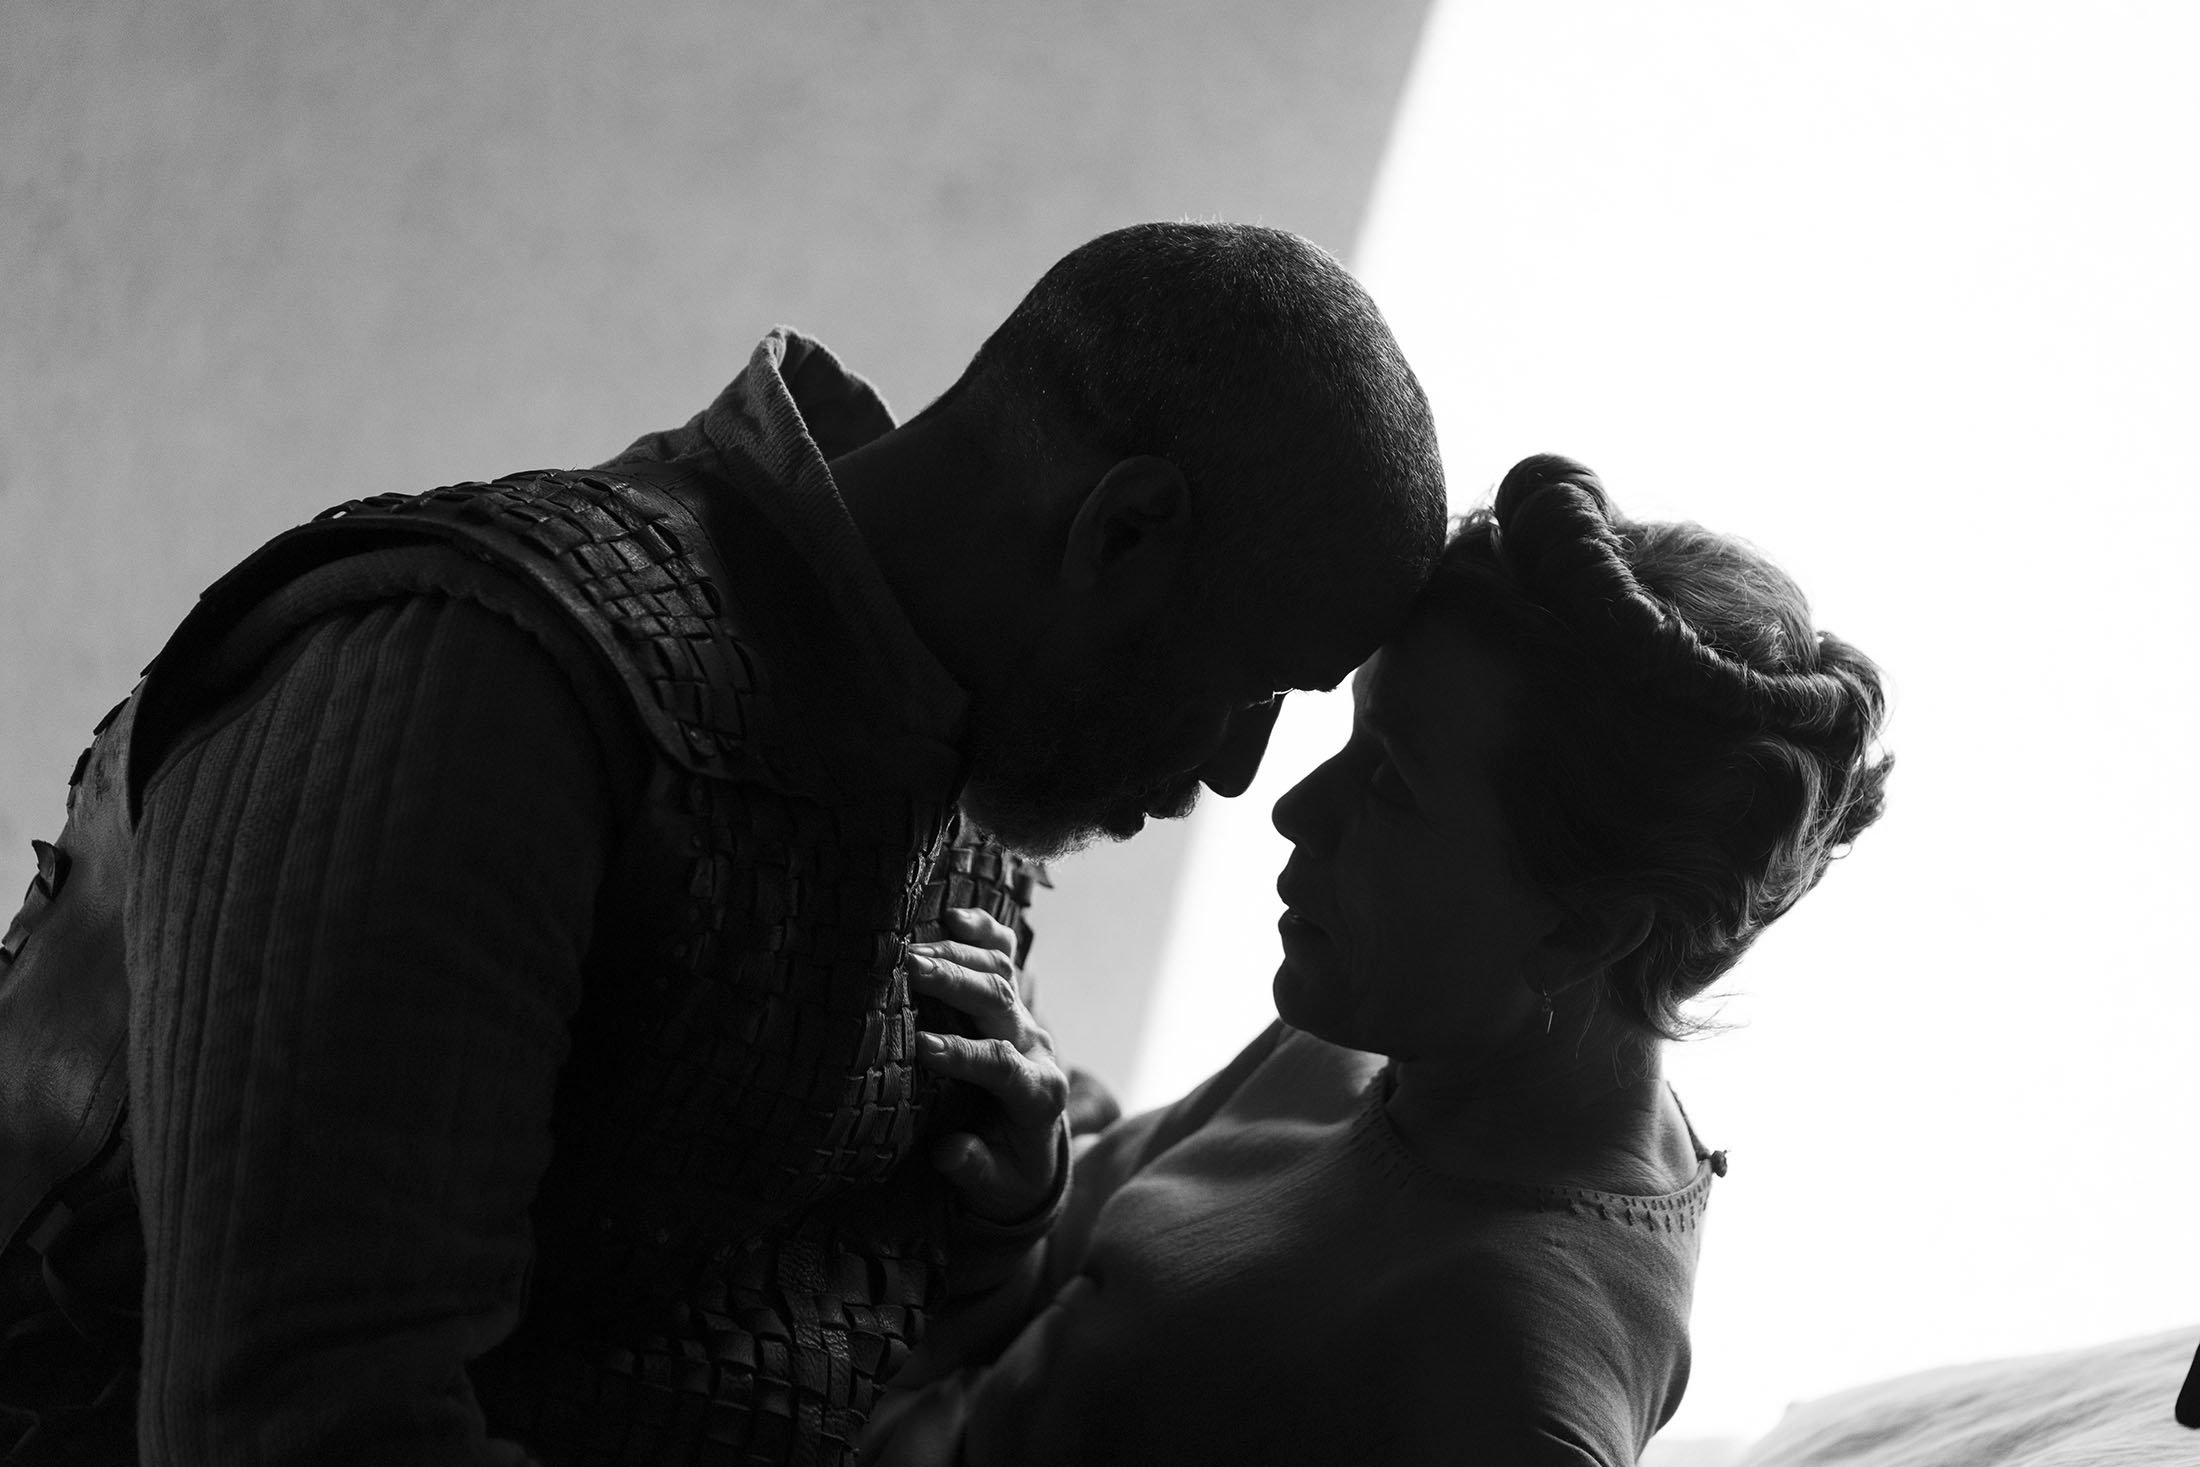 Denzel Washington (L) and Frances McDormand in a scene from the film "The Tragedy of Macbeth." (A24 via AP)